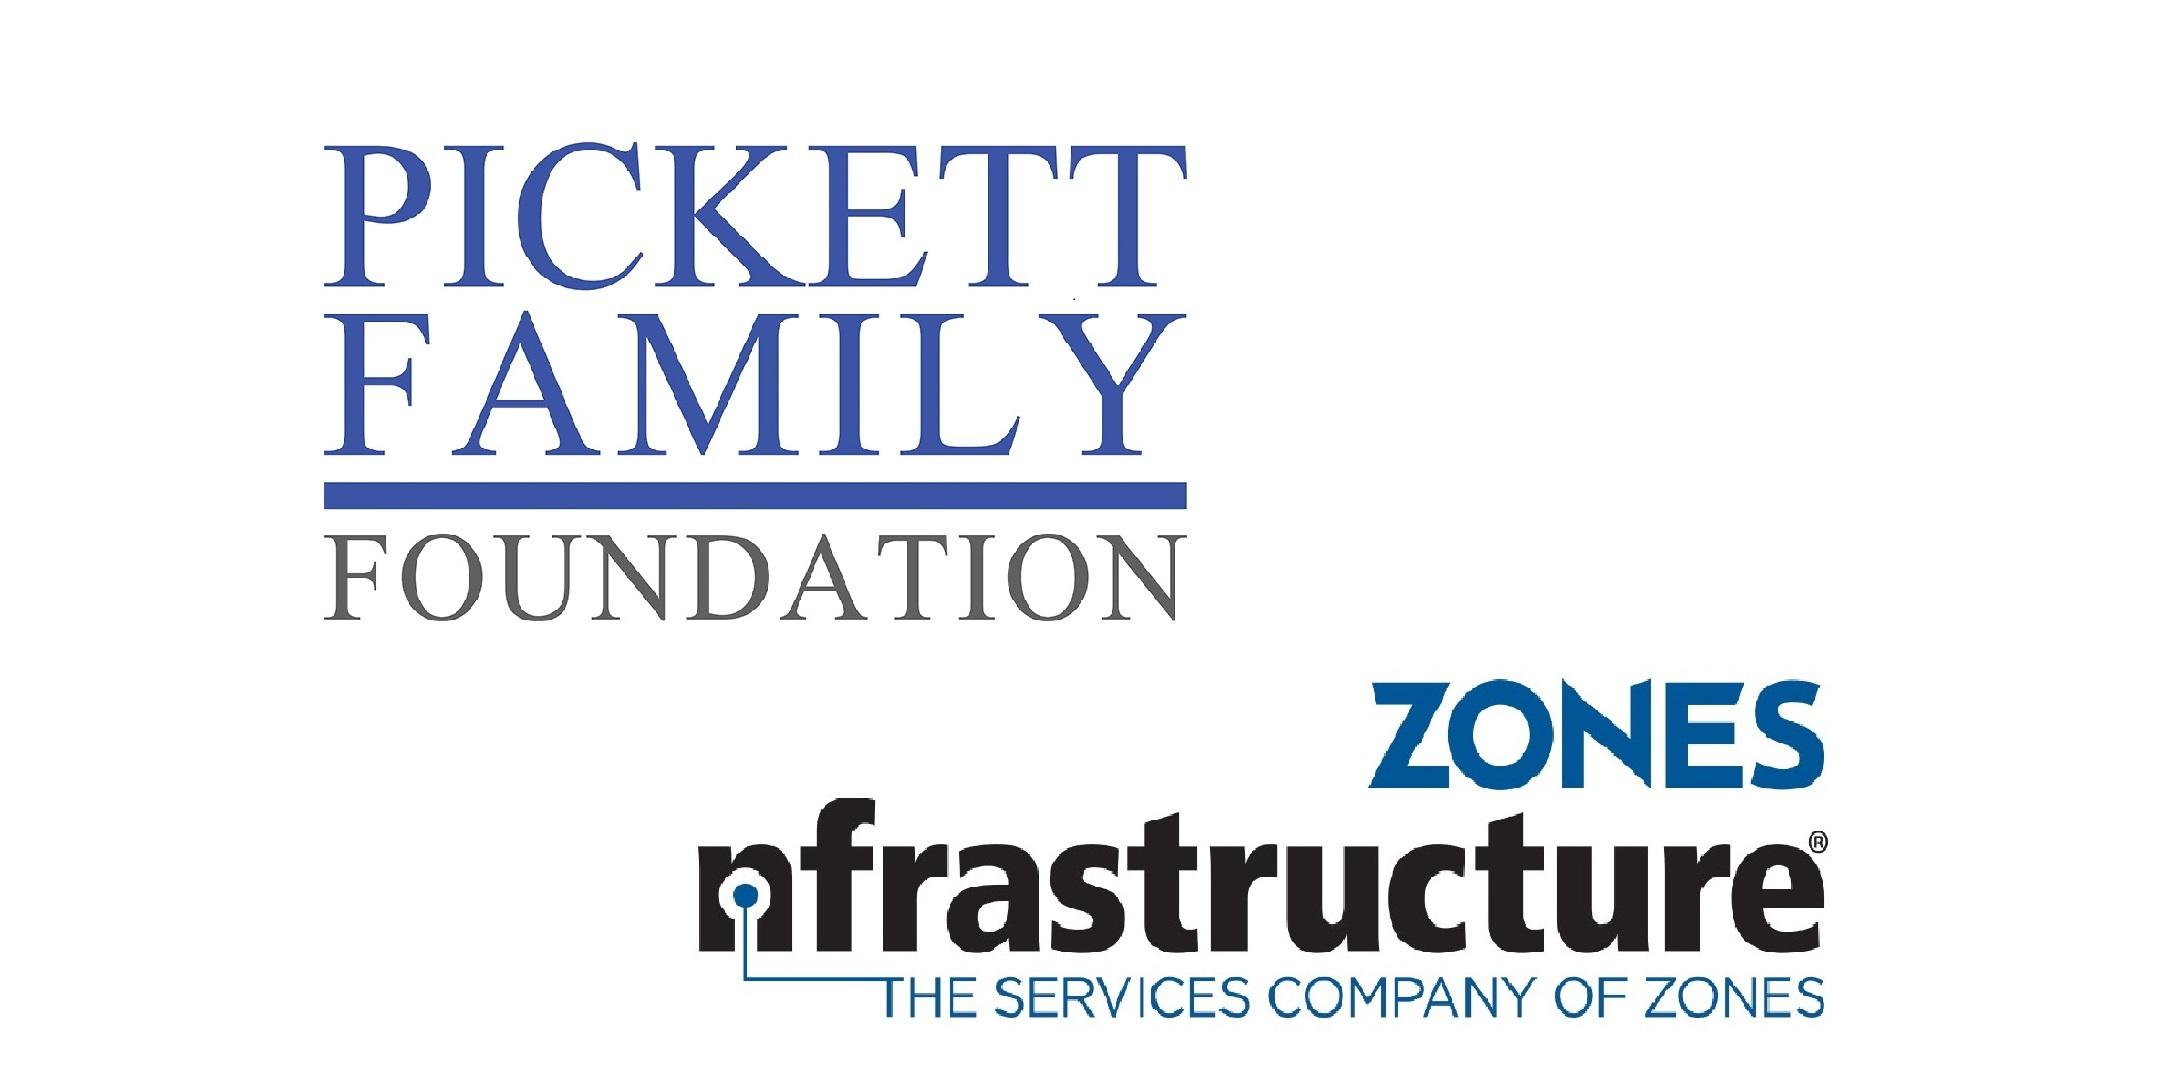 Pickett Family Foundation & Zones nfrastructure Golf Outing and Cocktail Reception 2019